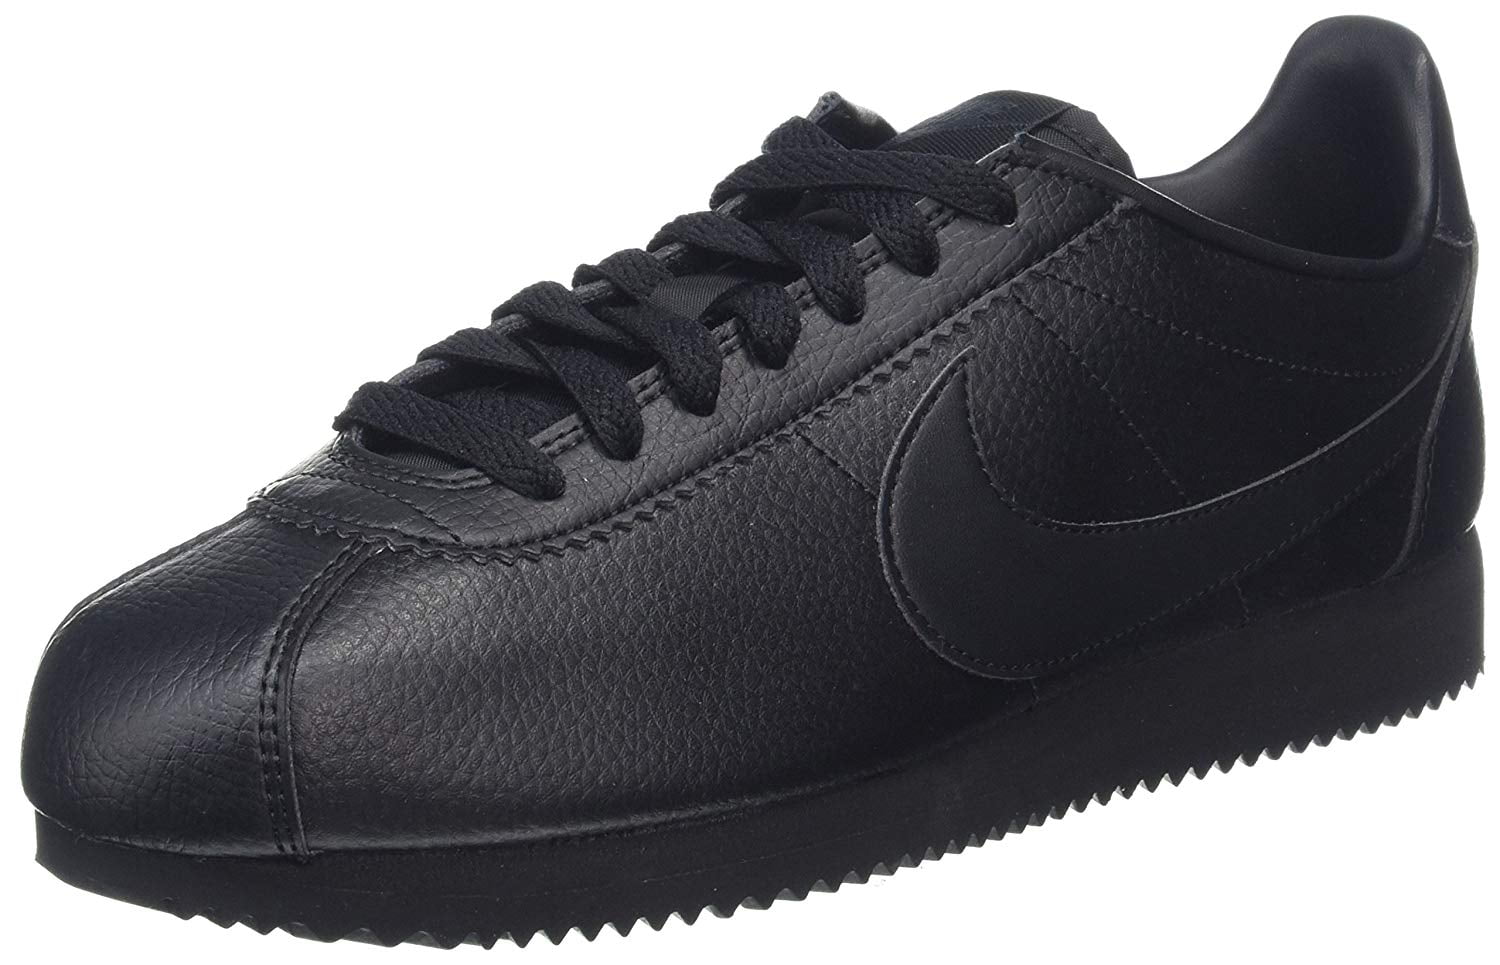 nike classic cortez leather mens